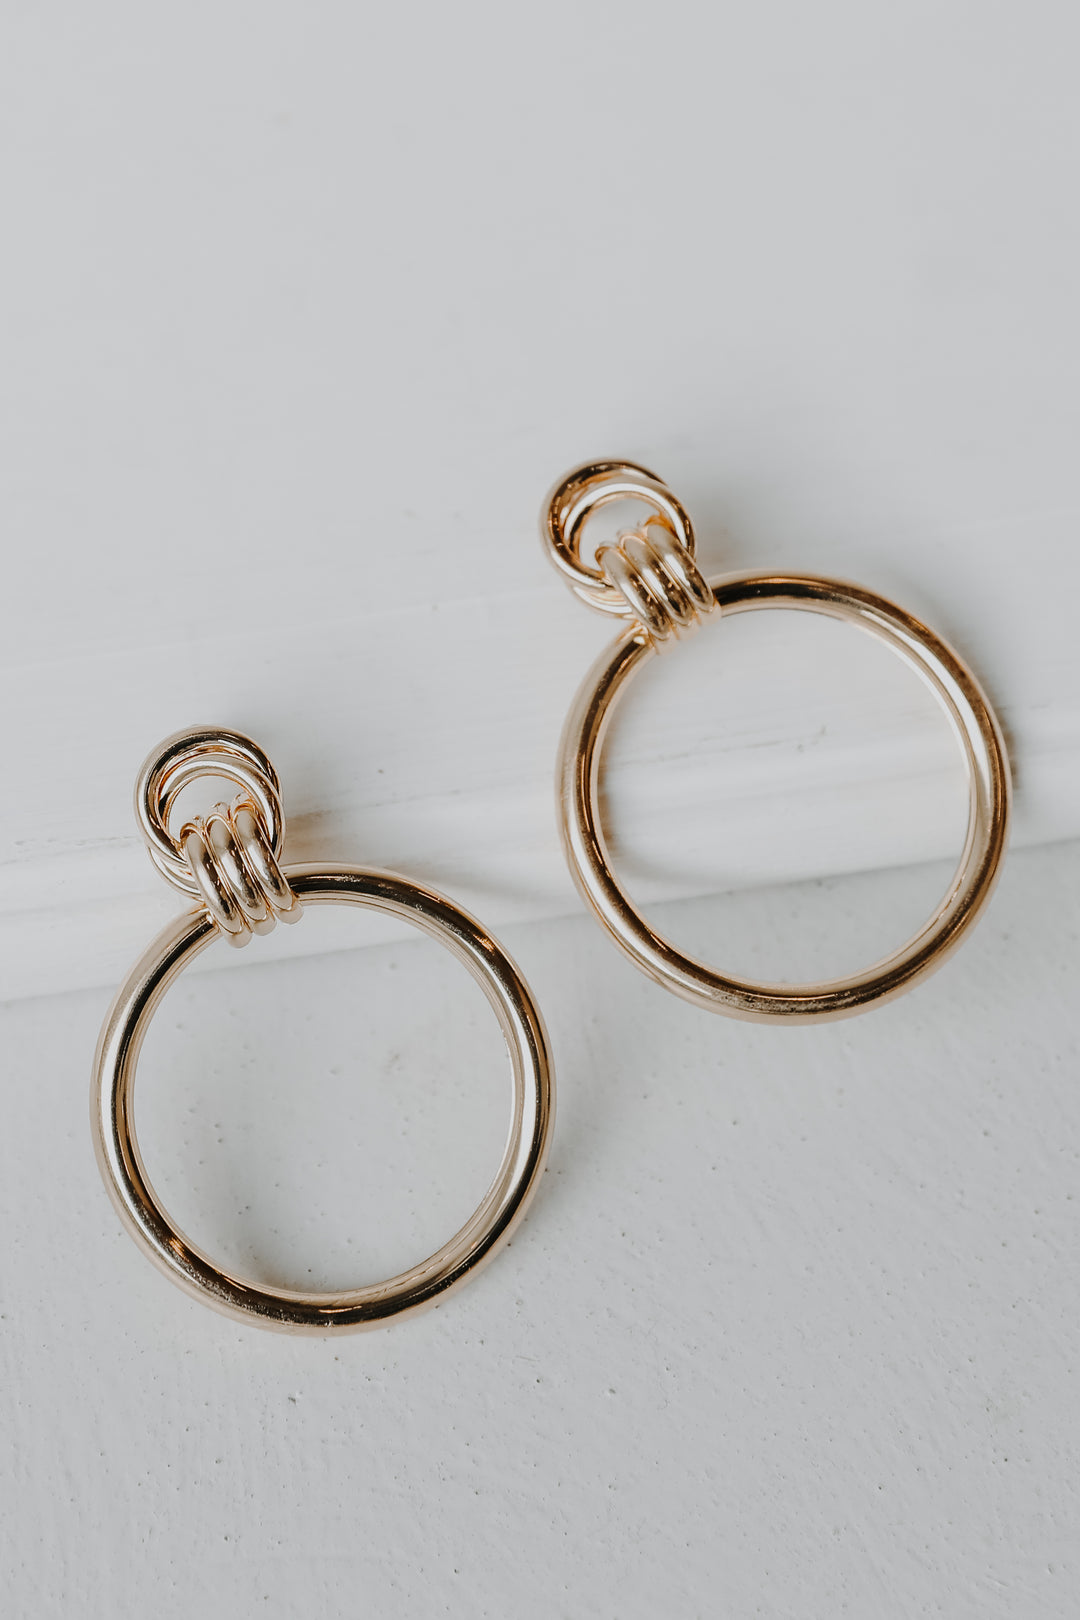 Gold Circle Statement Earrings from dress up